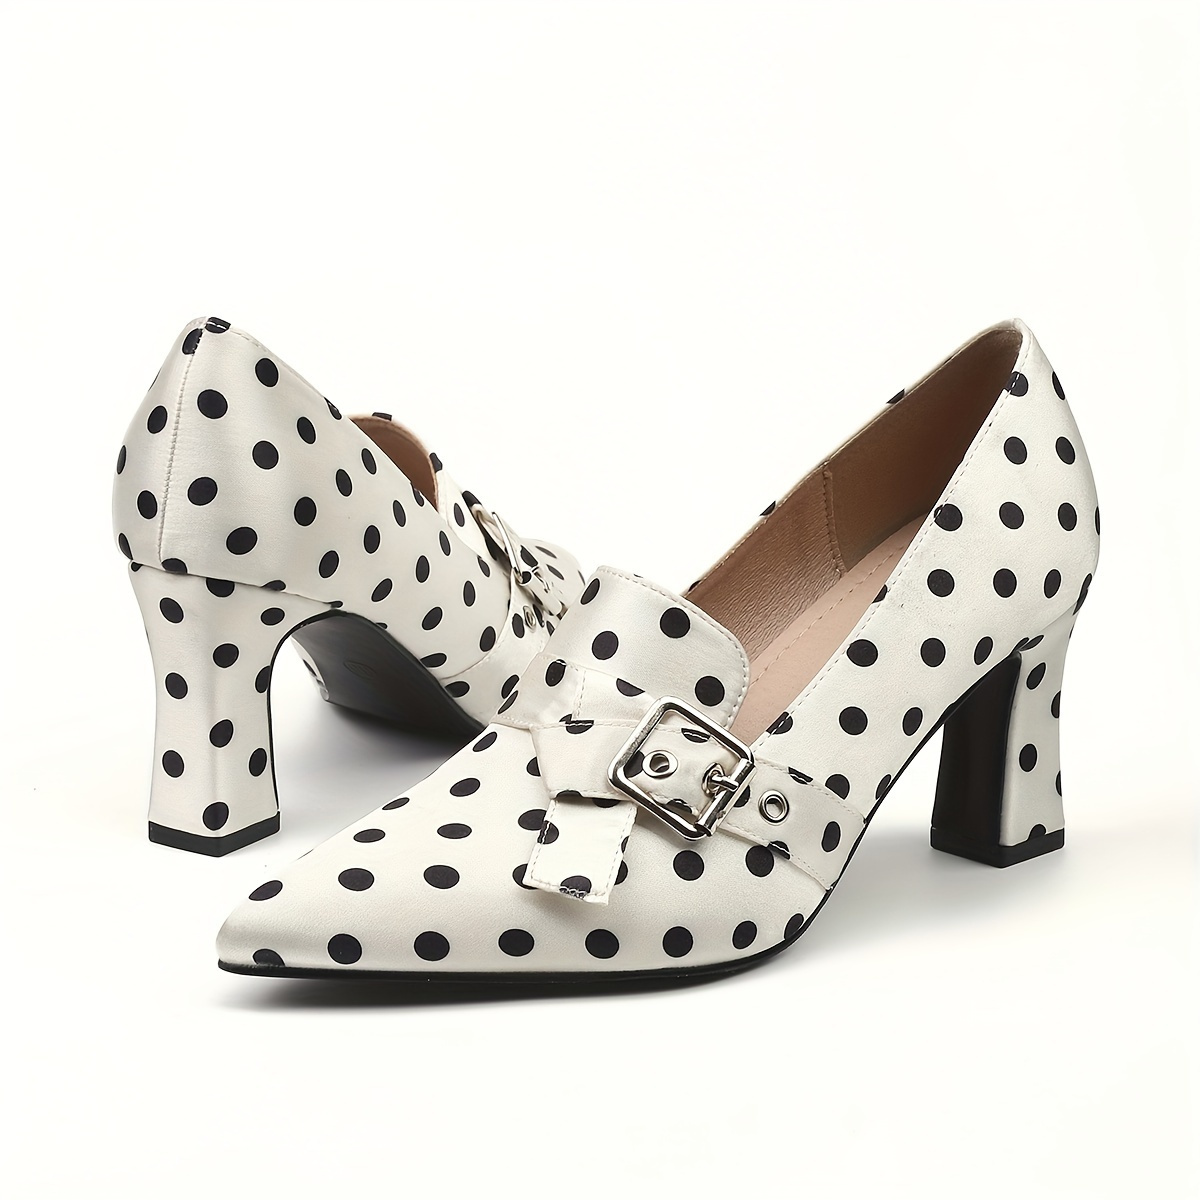 

Women's Polka Dot Pointed Toe Pumps, Strappy Heels With Metallic Buckle, Versatile Vintage Preppy Fashion Shoes